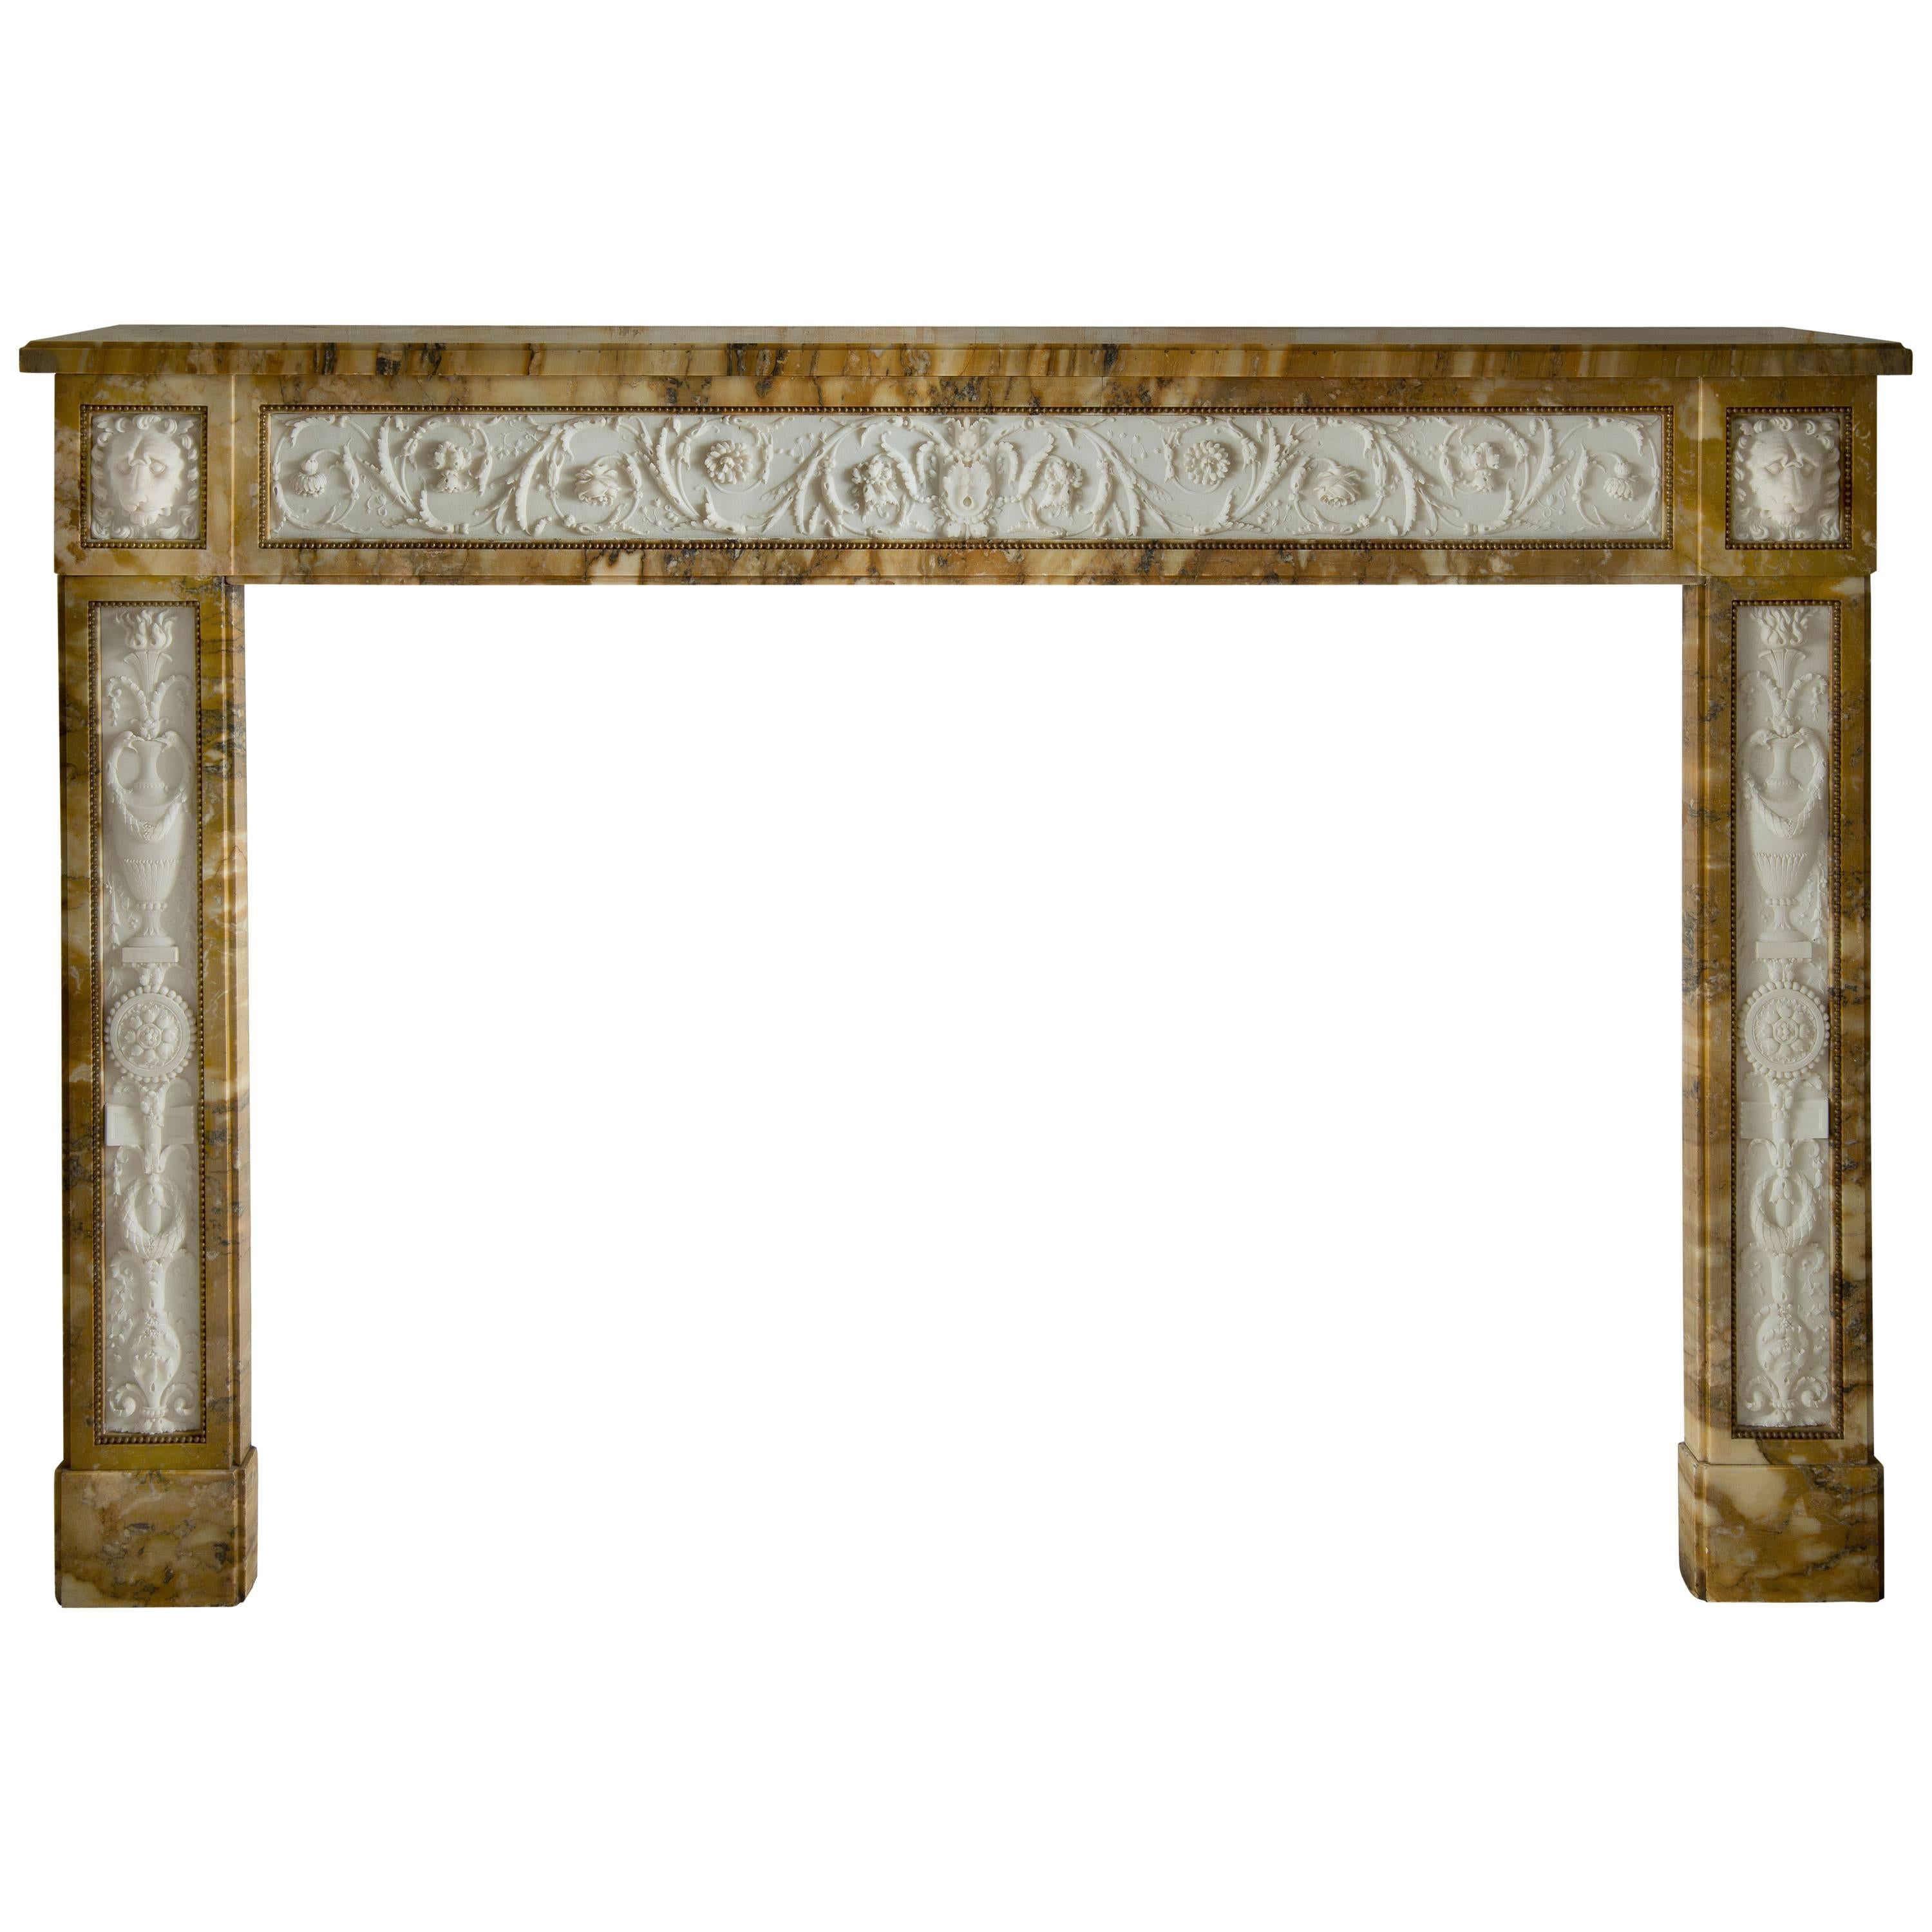 A Louis XVI Style Yellow Marble Fireplace, 19th Century, circa 1803-1810 For Sale